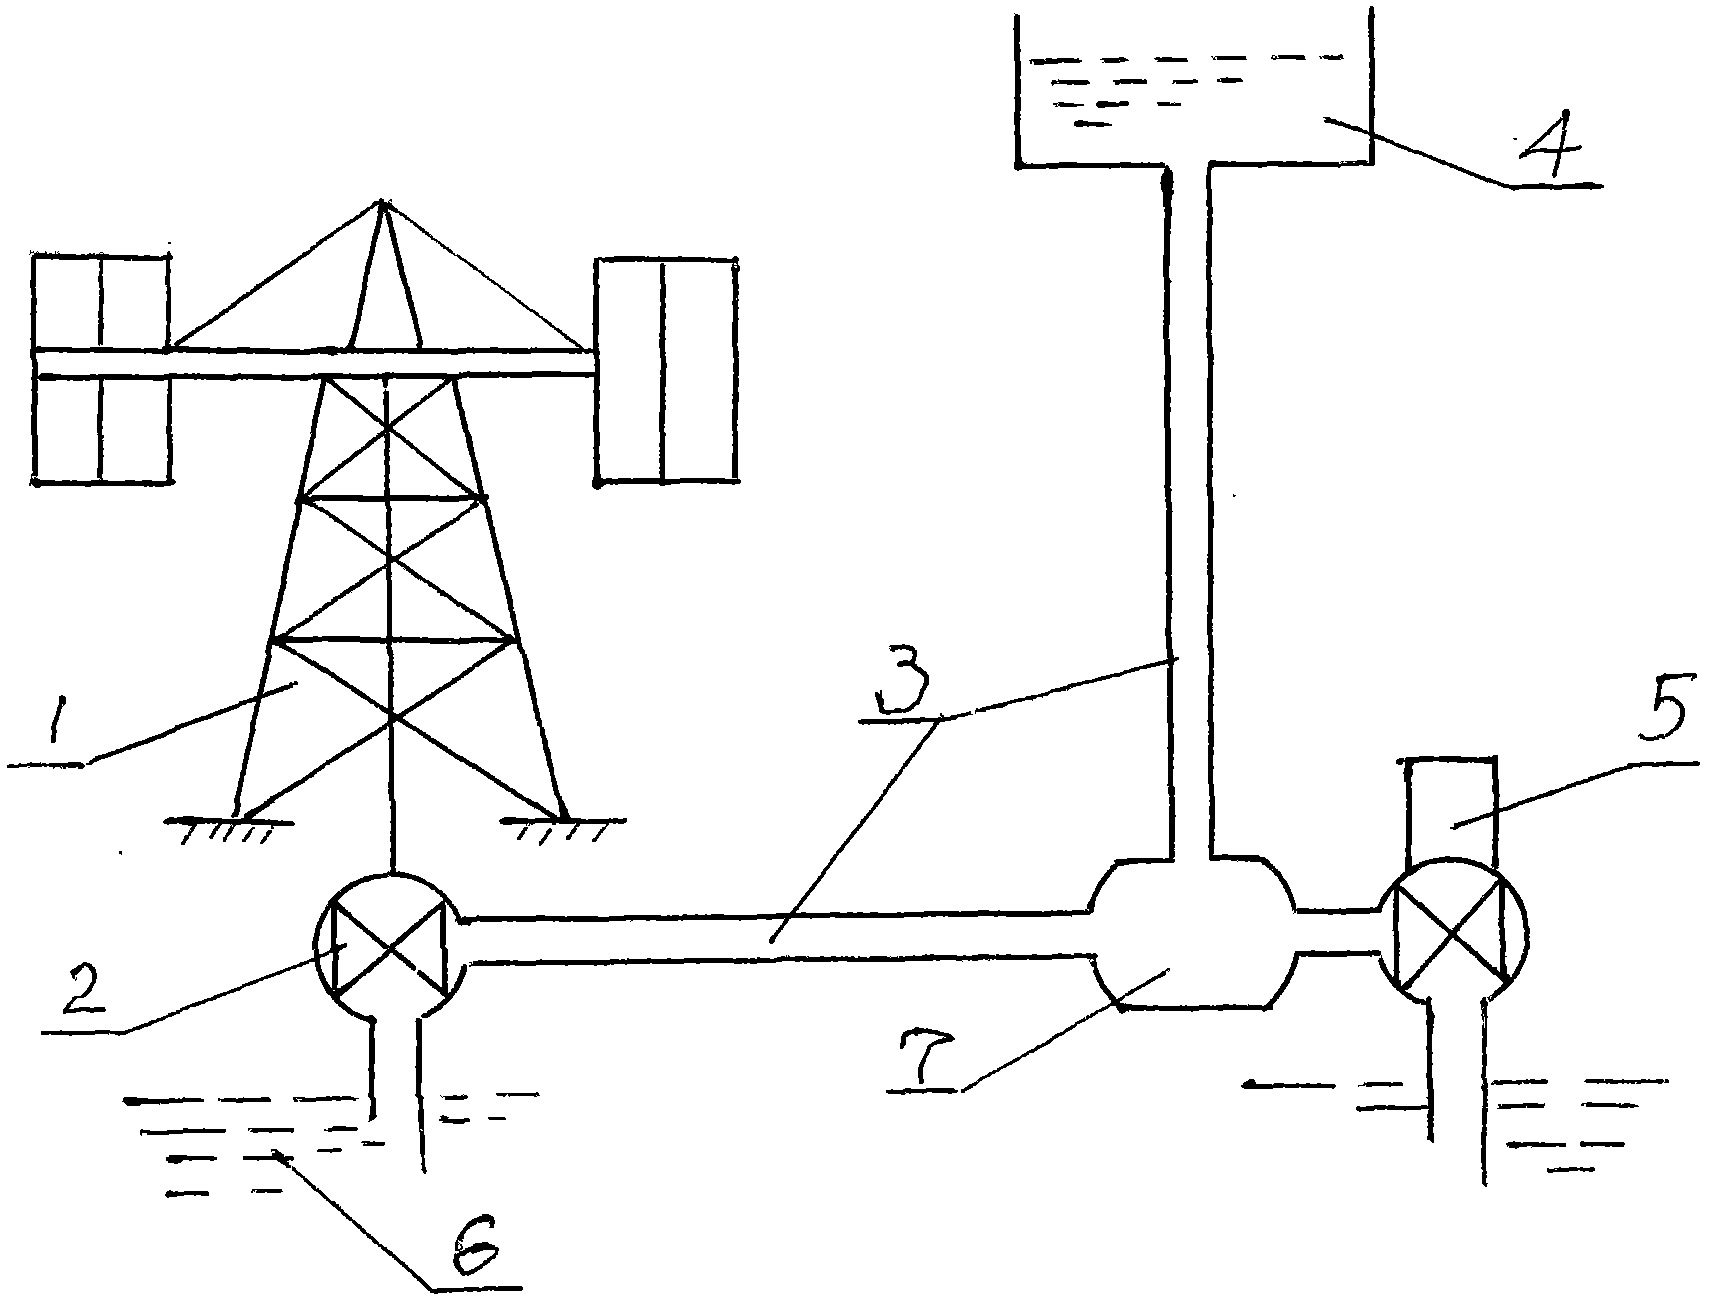 Wind-water combined wind-driven power generation system